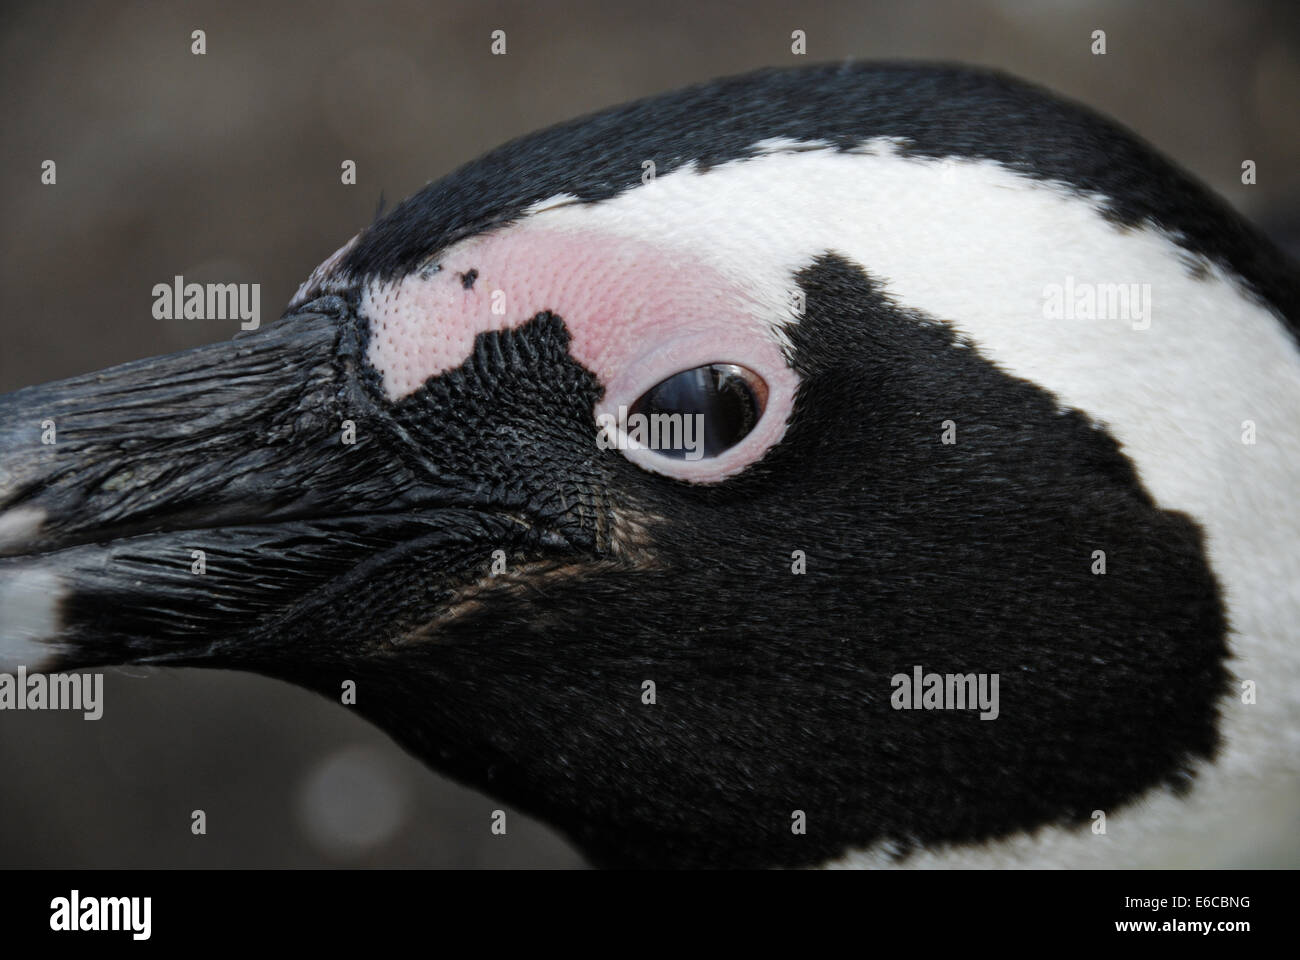 Black Footed Jackass Penguin head (Speniscus demersus), Betty's Bay, South Western Cape, South Africa Stock Photo